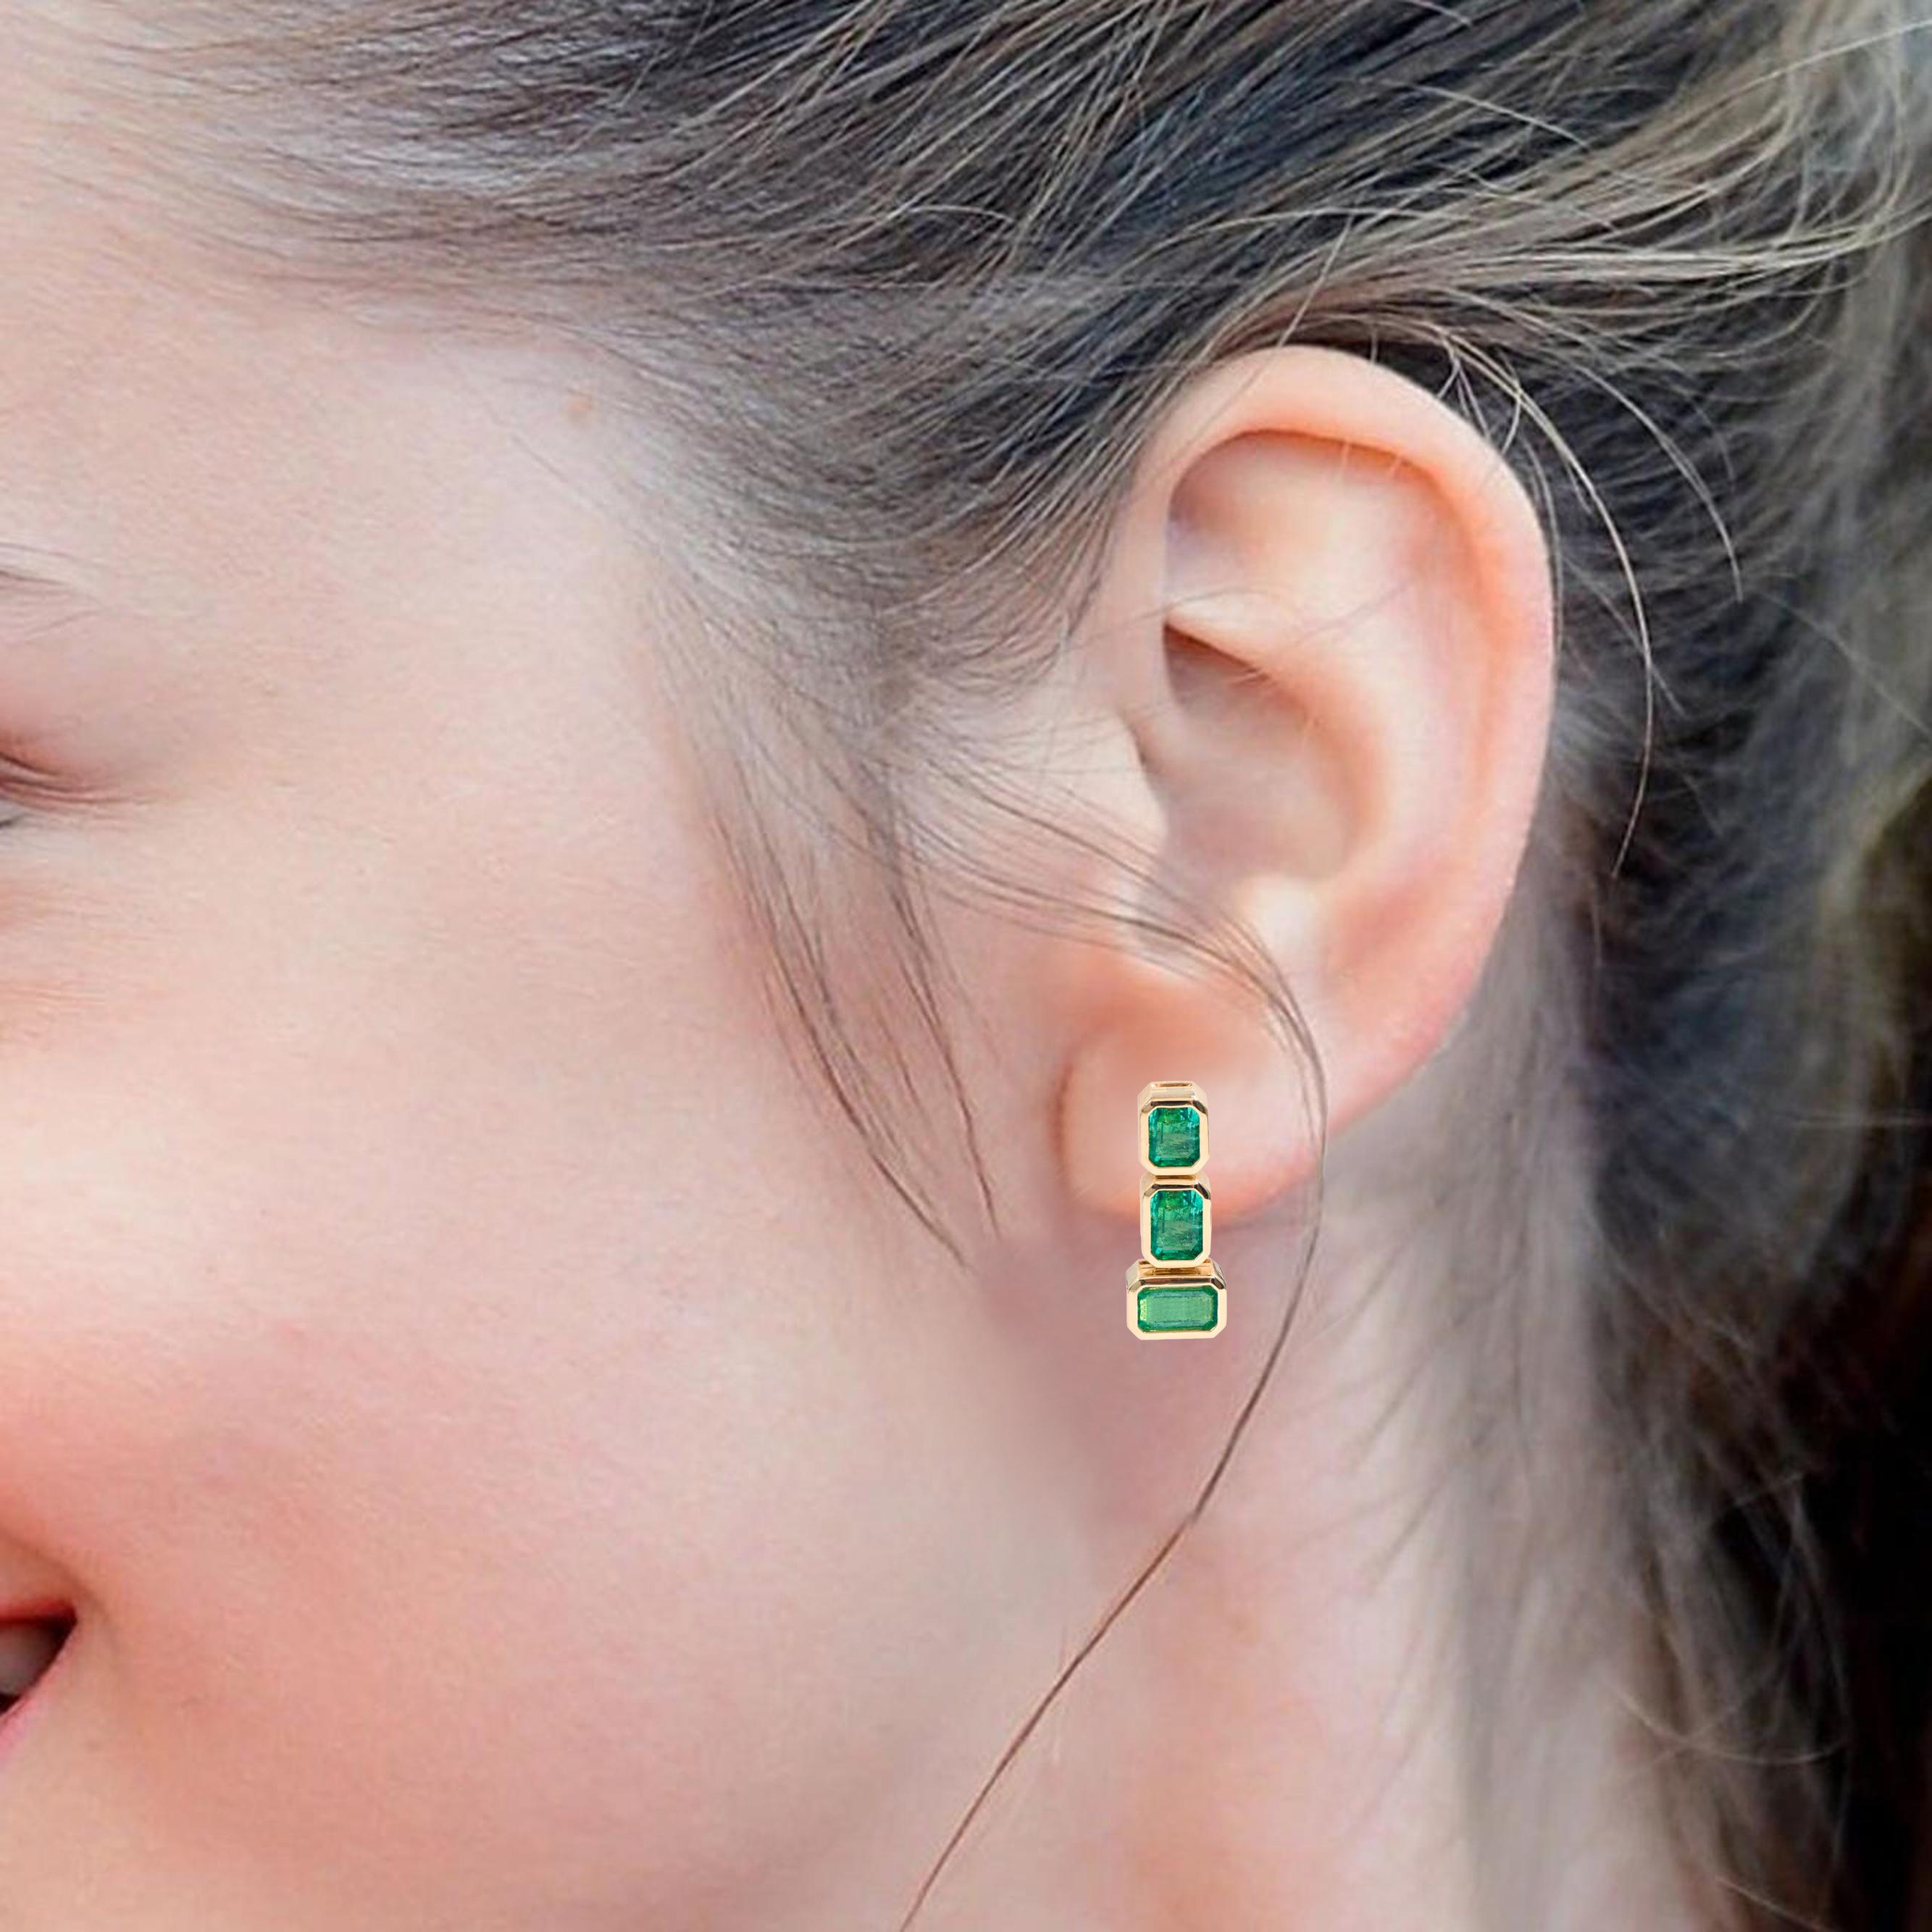 18 Karat Yellow Gold 6.53 Carat Natural Emerald-Cut Emerald Dangle Earrings

This exquisite parakeet green emerald cut emerald earring pair is alluring and graceful. It may seem like the regular classic closed setting long earring, but it’s much